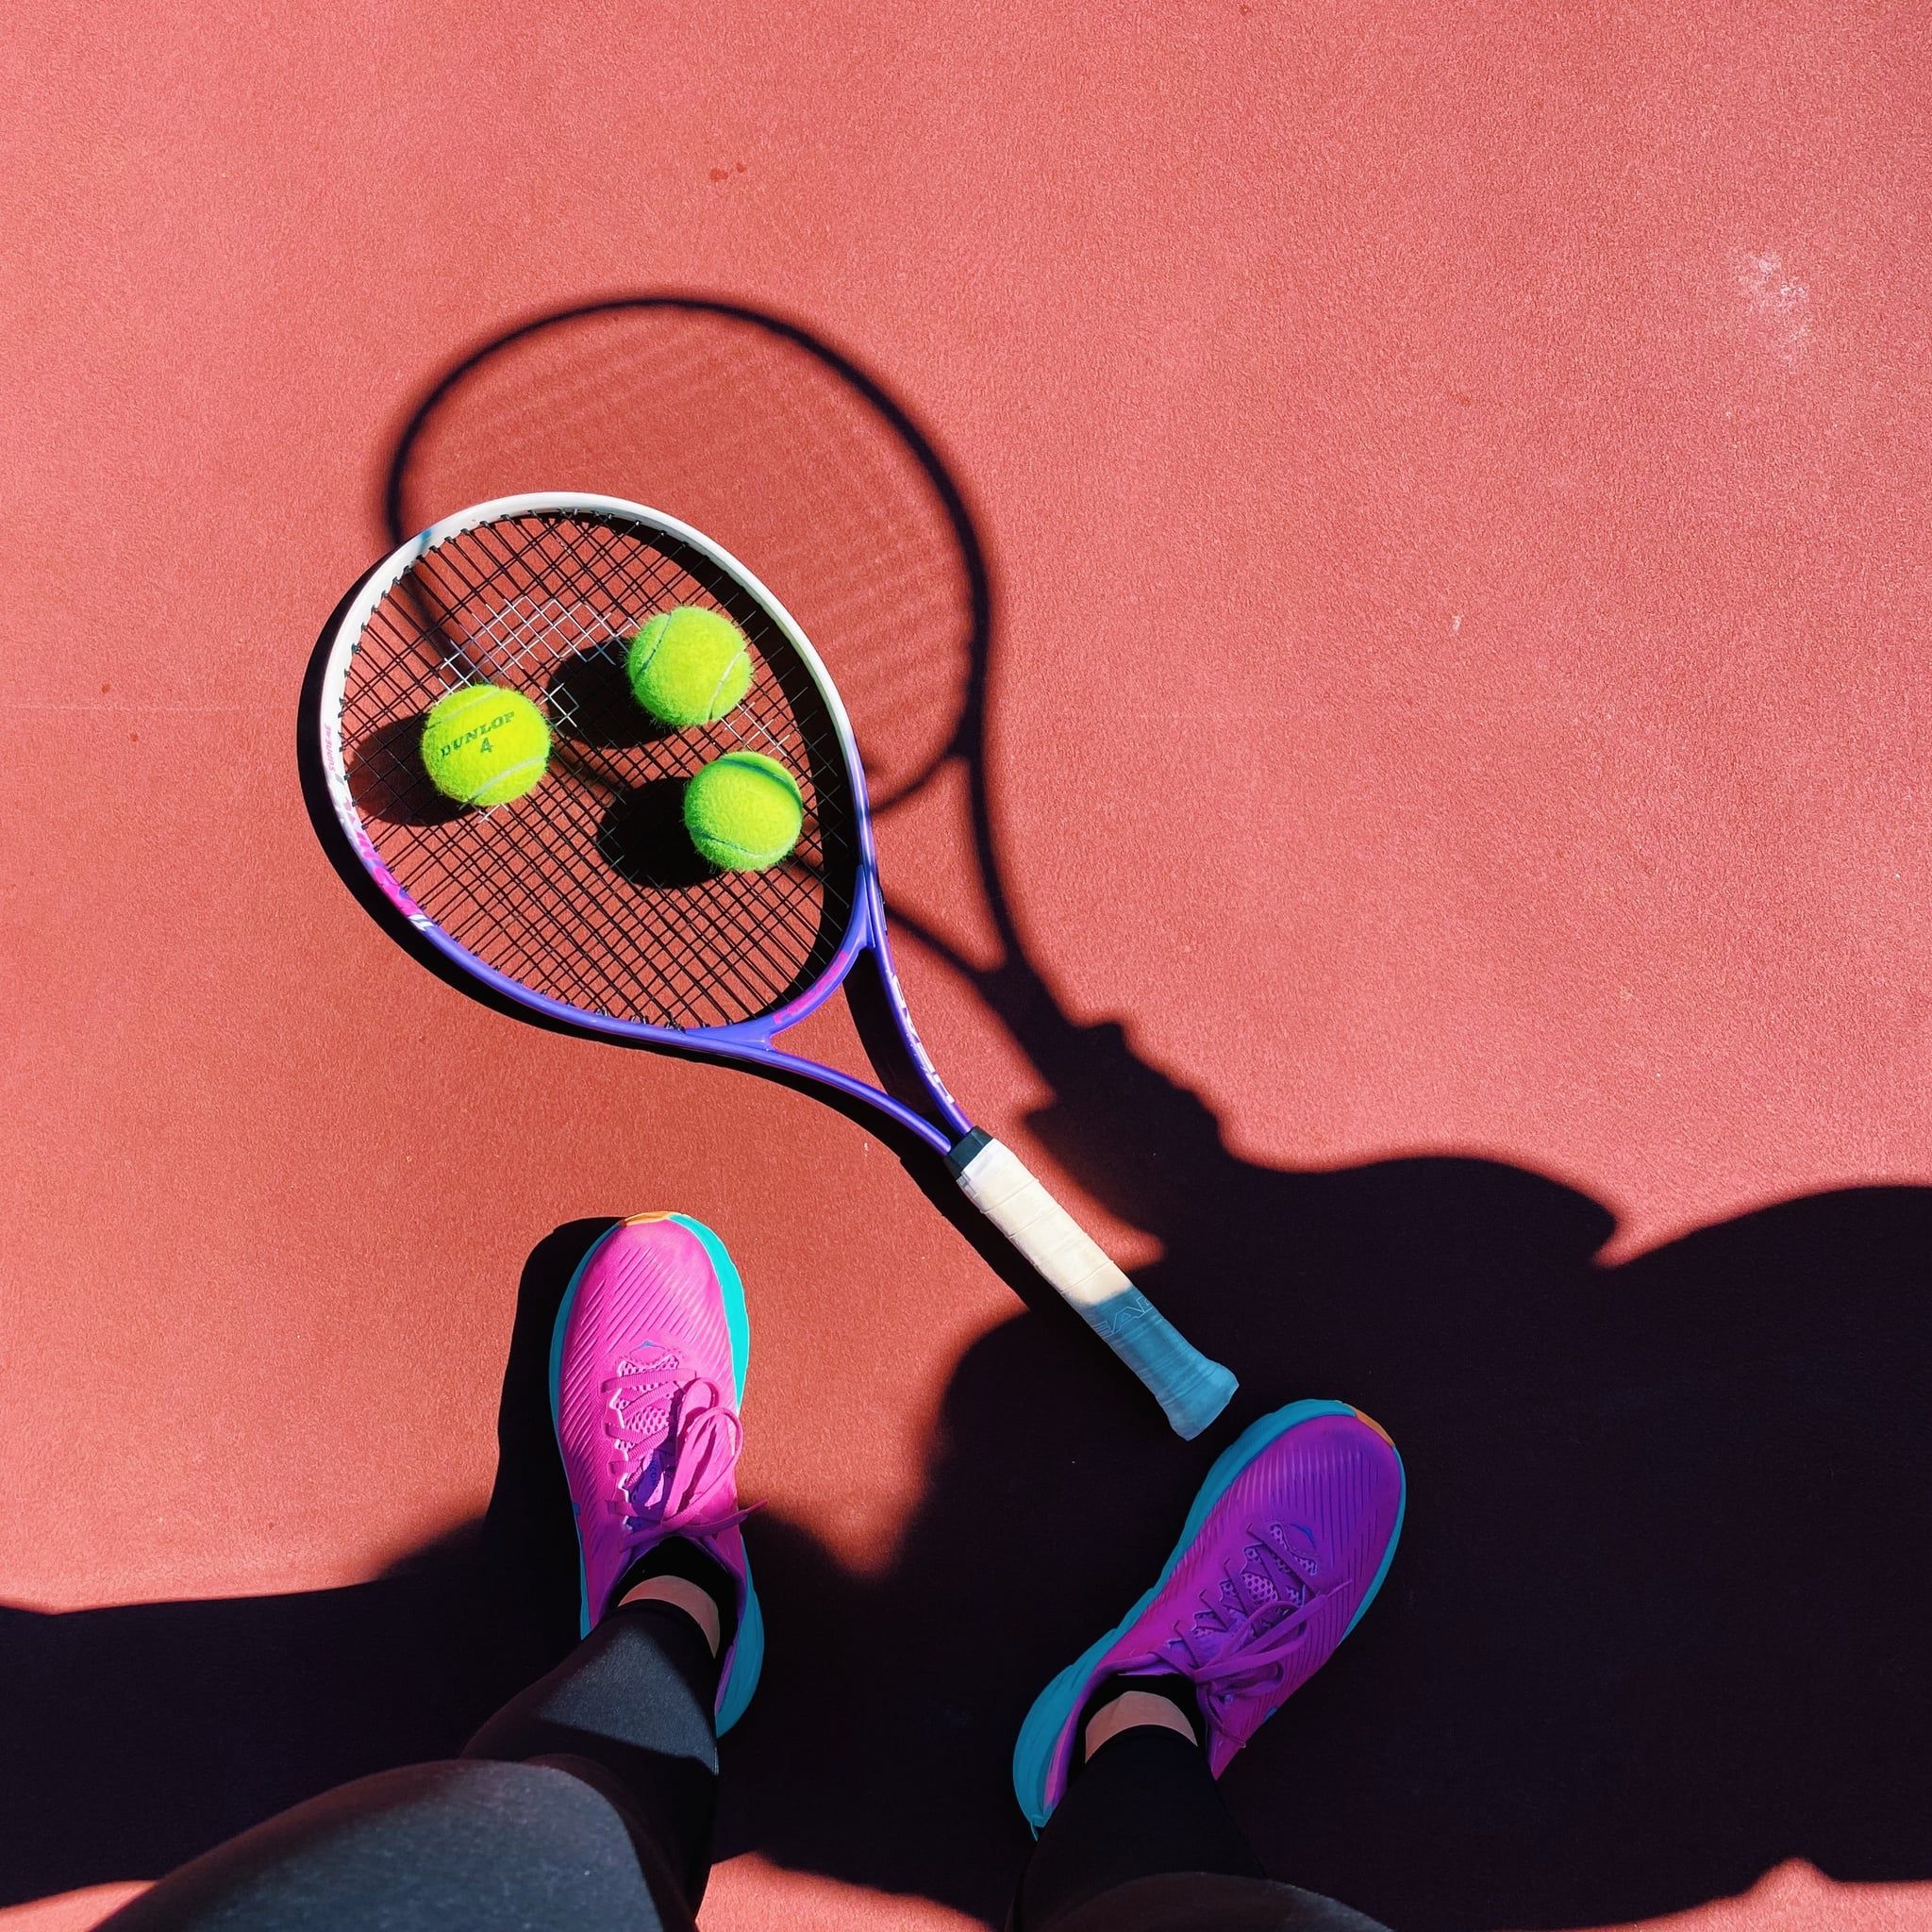 A tennis racket with two tennis balls on a red surface. - Tennis